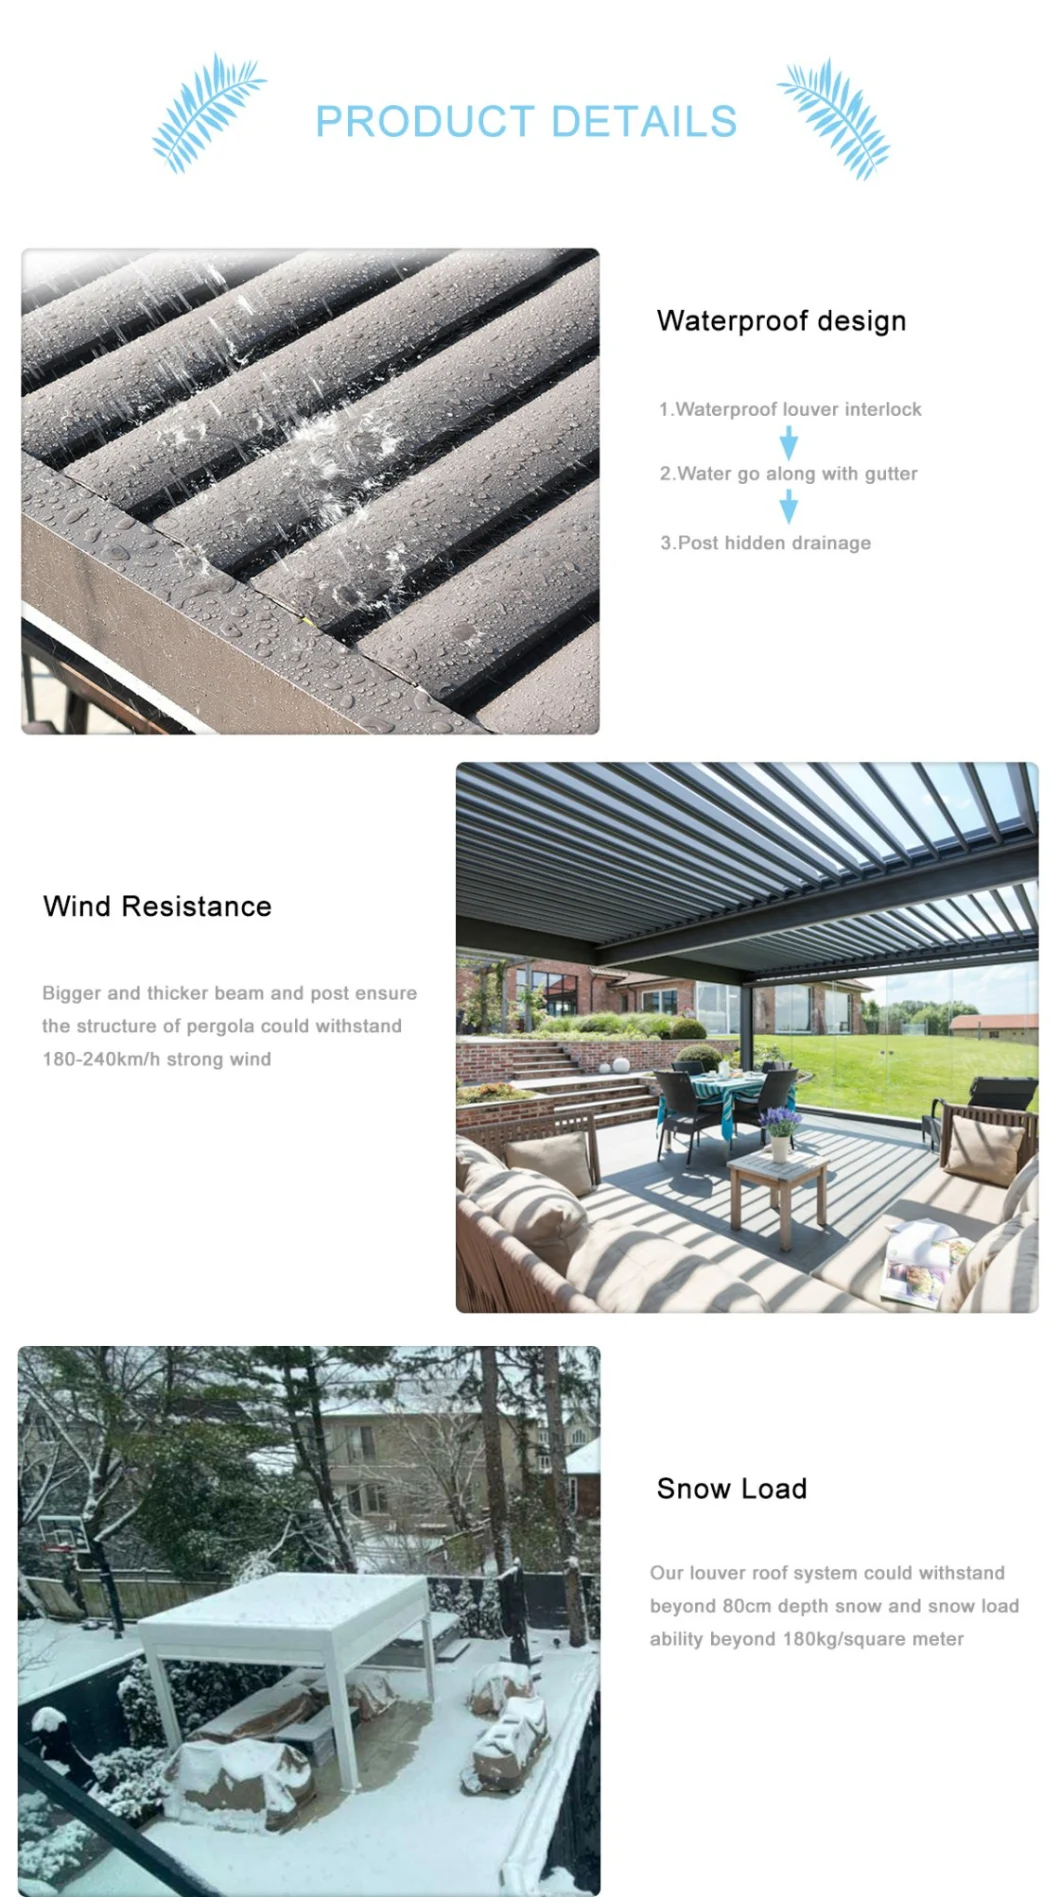 Fully Automatic Terrace Roof Sliding Outdoor Furniture SPA BBQ Louver Roof Waterproof Gazebo Aluminum Pergola Retractable Awning with Side Screen